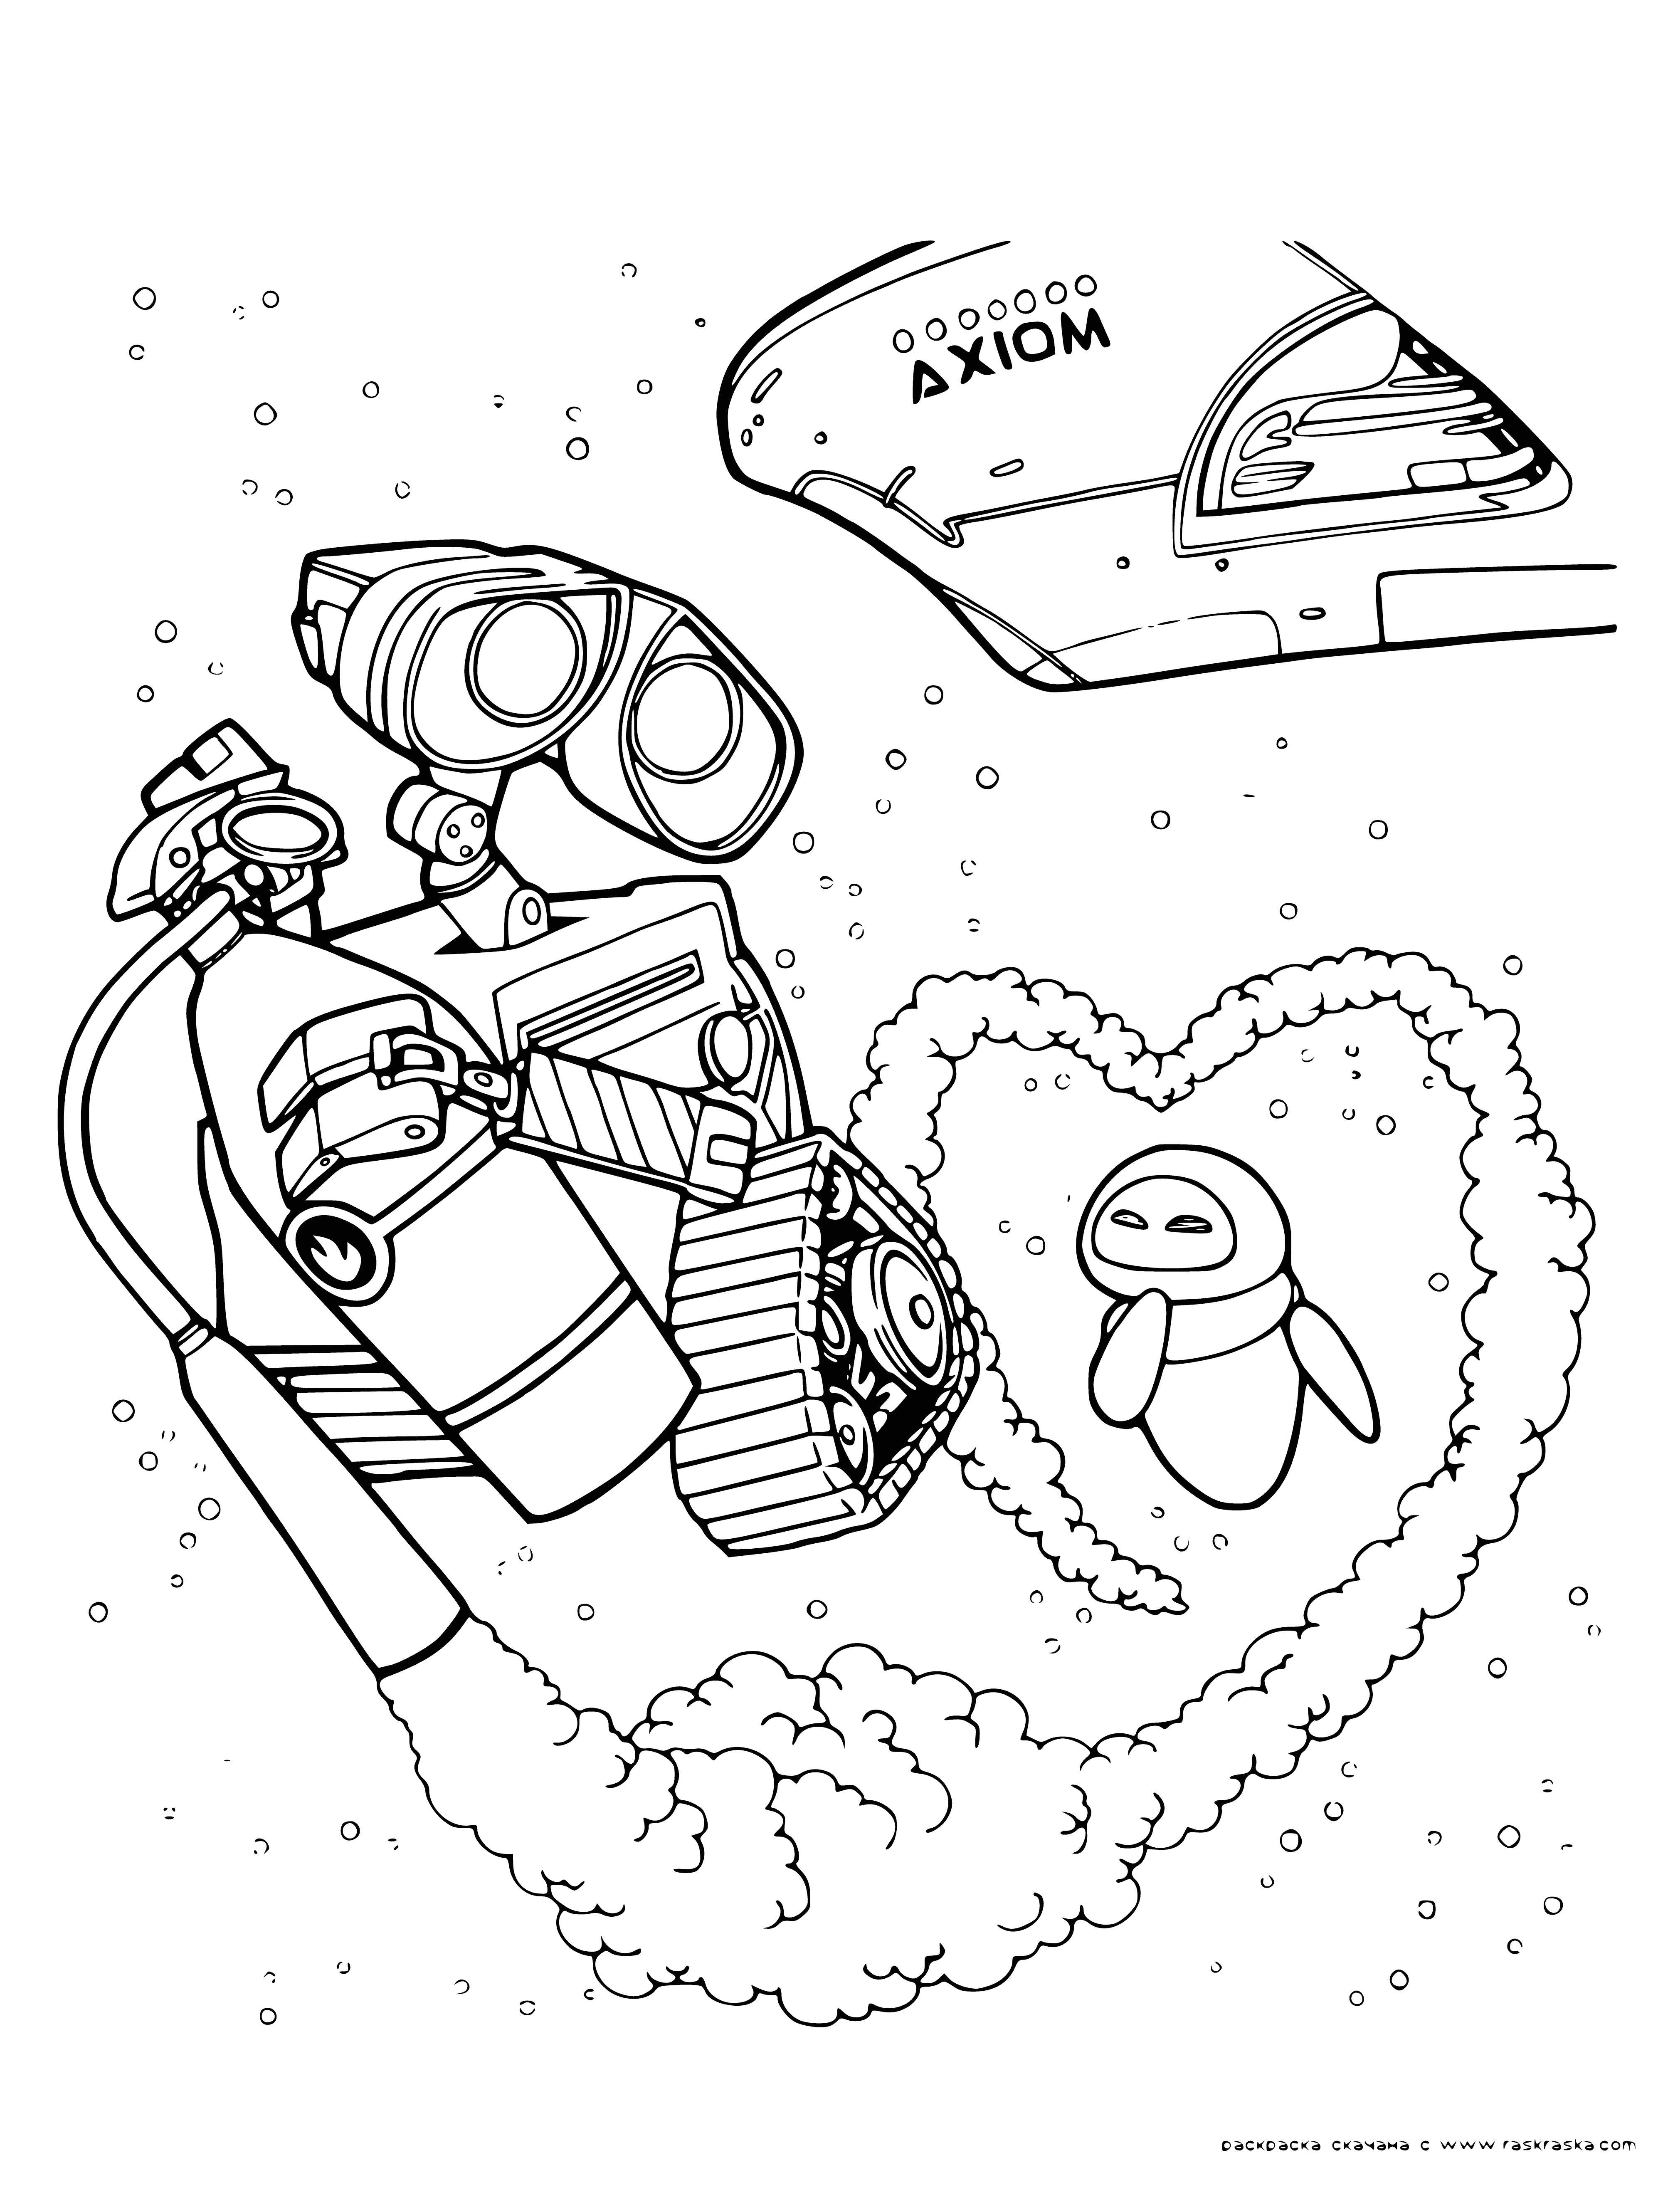 coloring page: Eve is a white robot w/ glossy finish & round eyes, while Wall-e is a rusty robot w/ boxy body & large, round eyes. They're standing in front of a green valley & blue sky. #Robotics